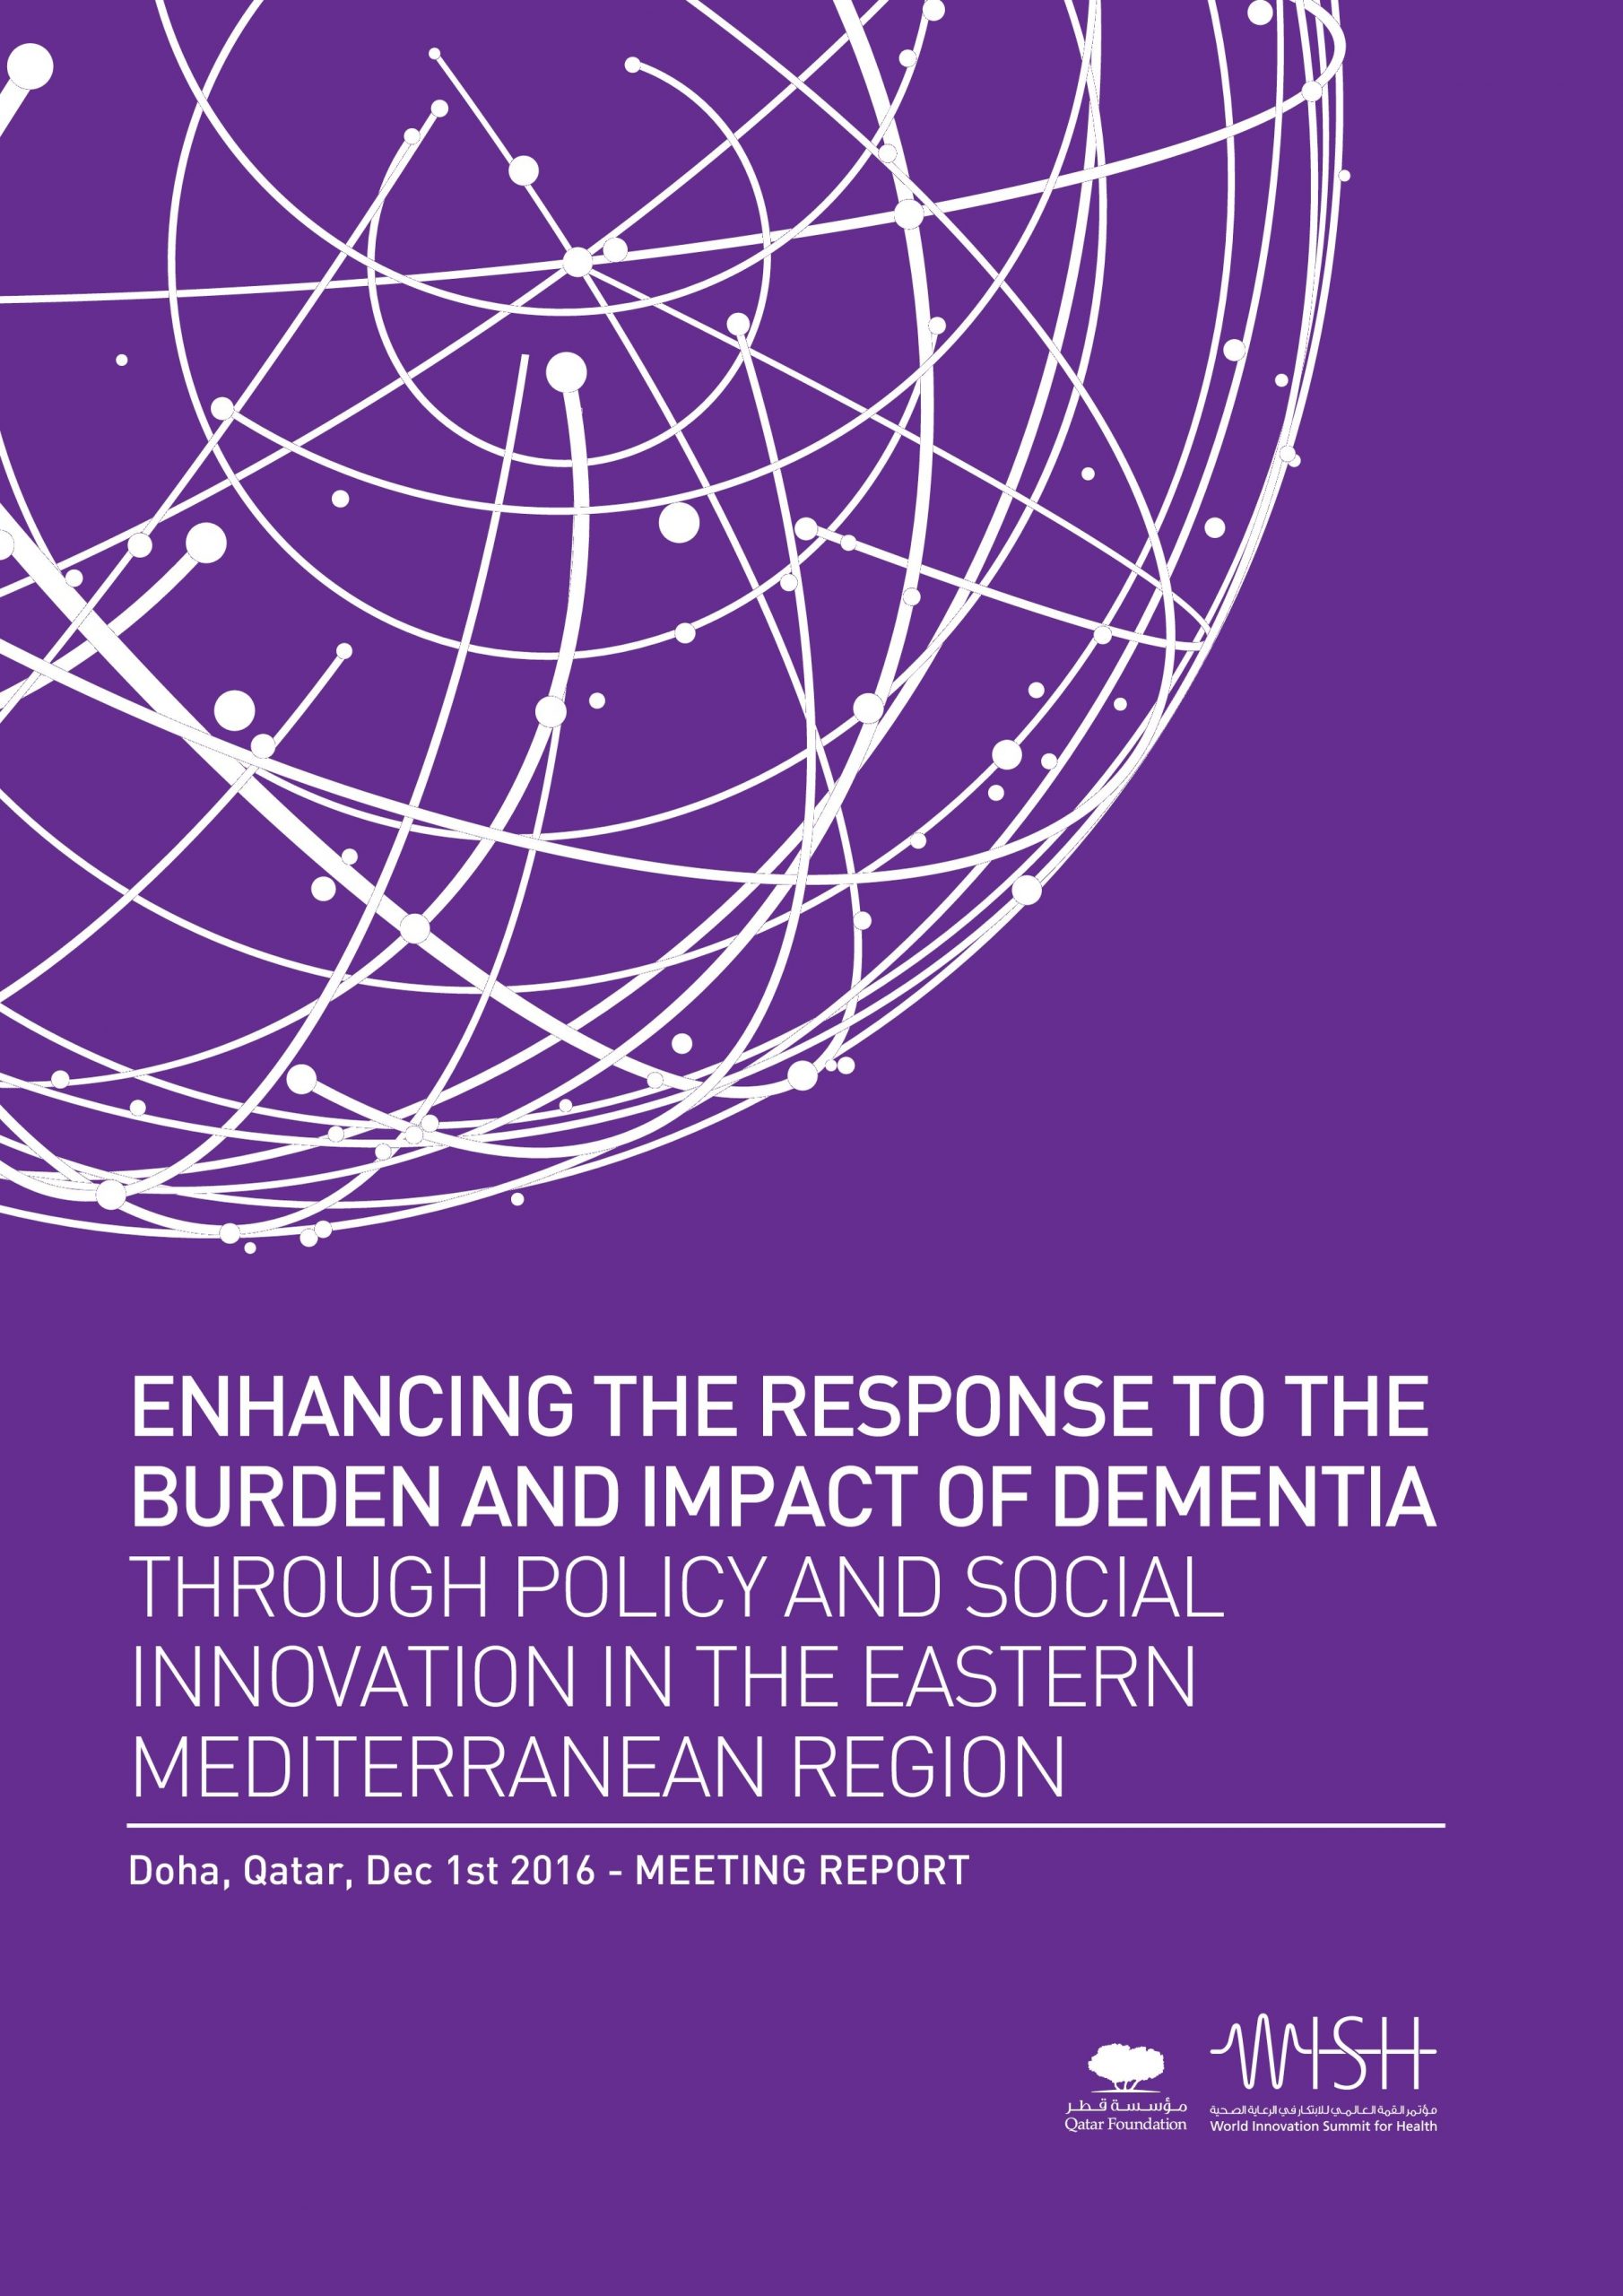 Enhancing the Response to the Burden and Impact of Dementia: Through Policy and Social Innovation in the Eastern Mediterranean Region